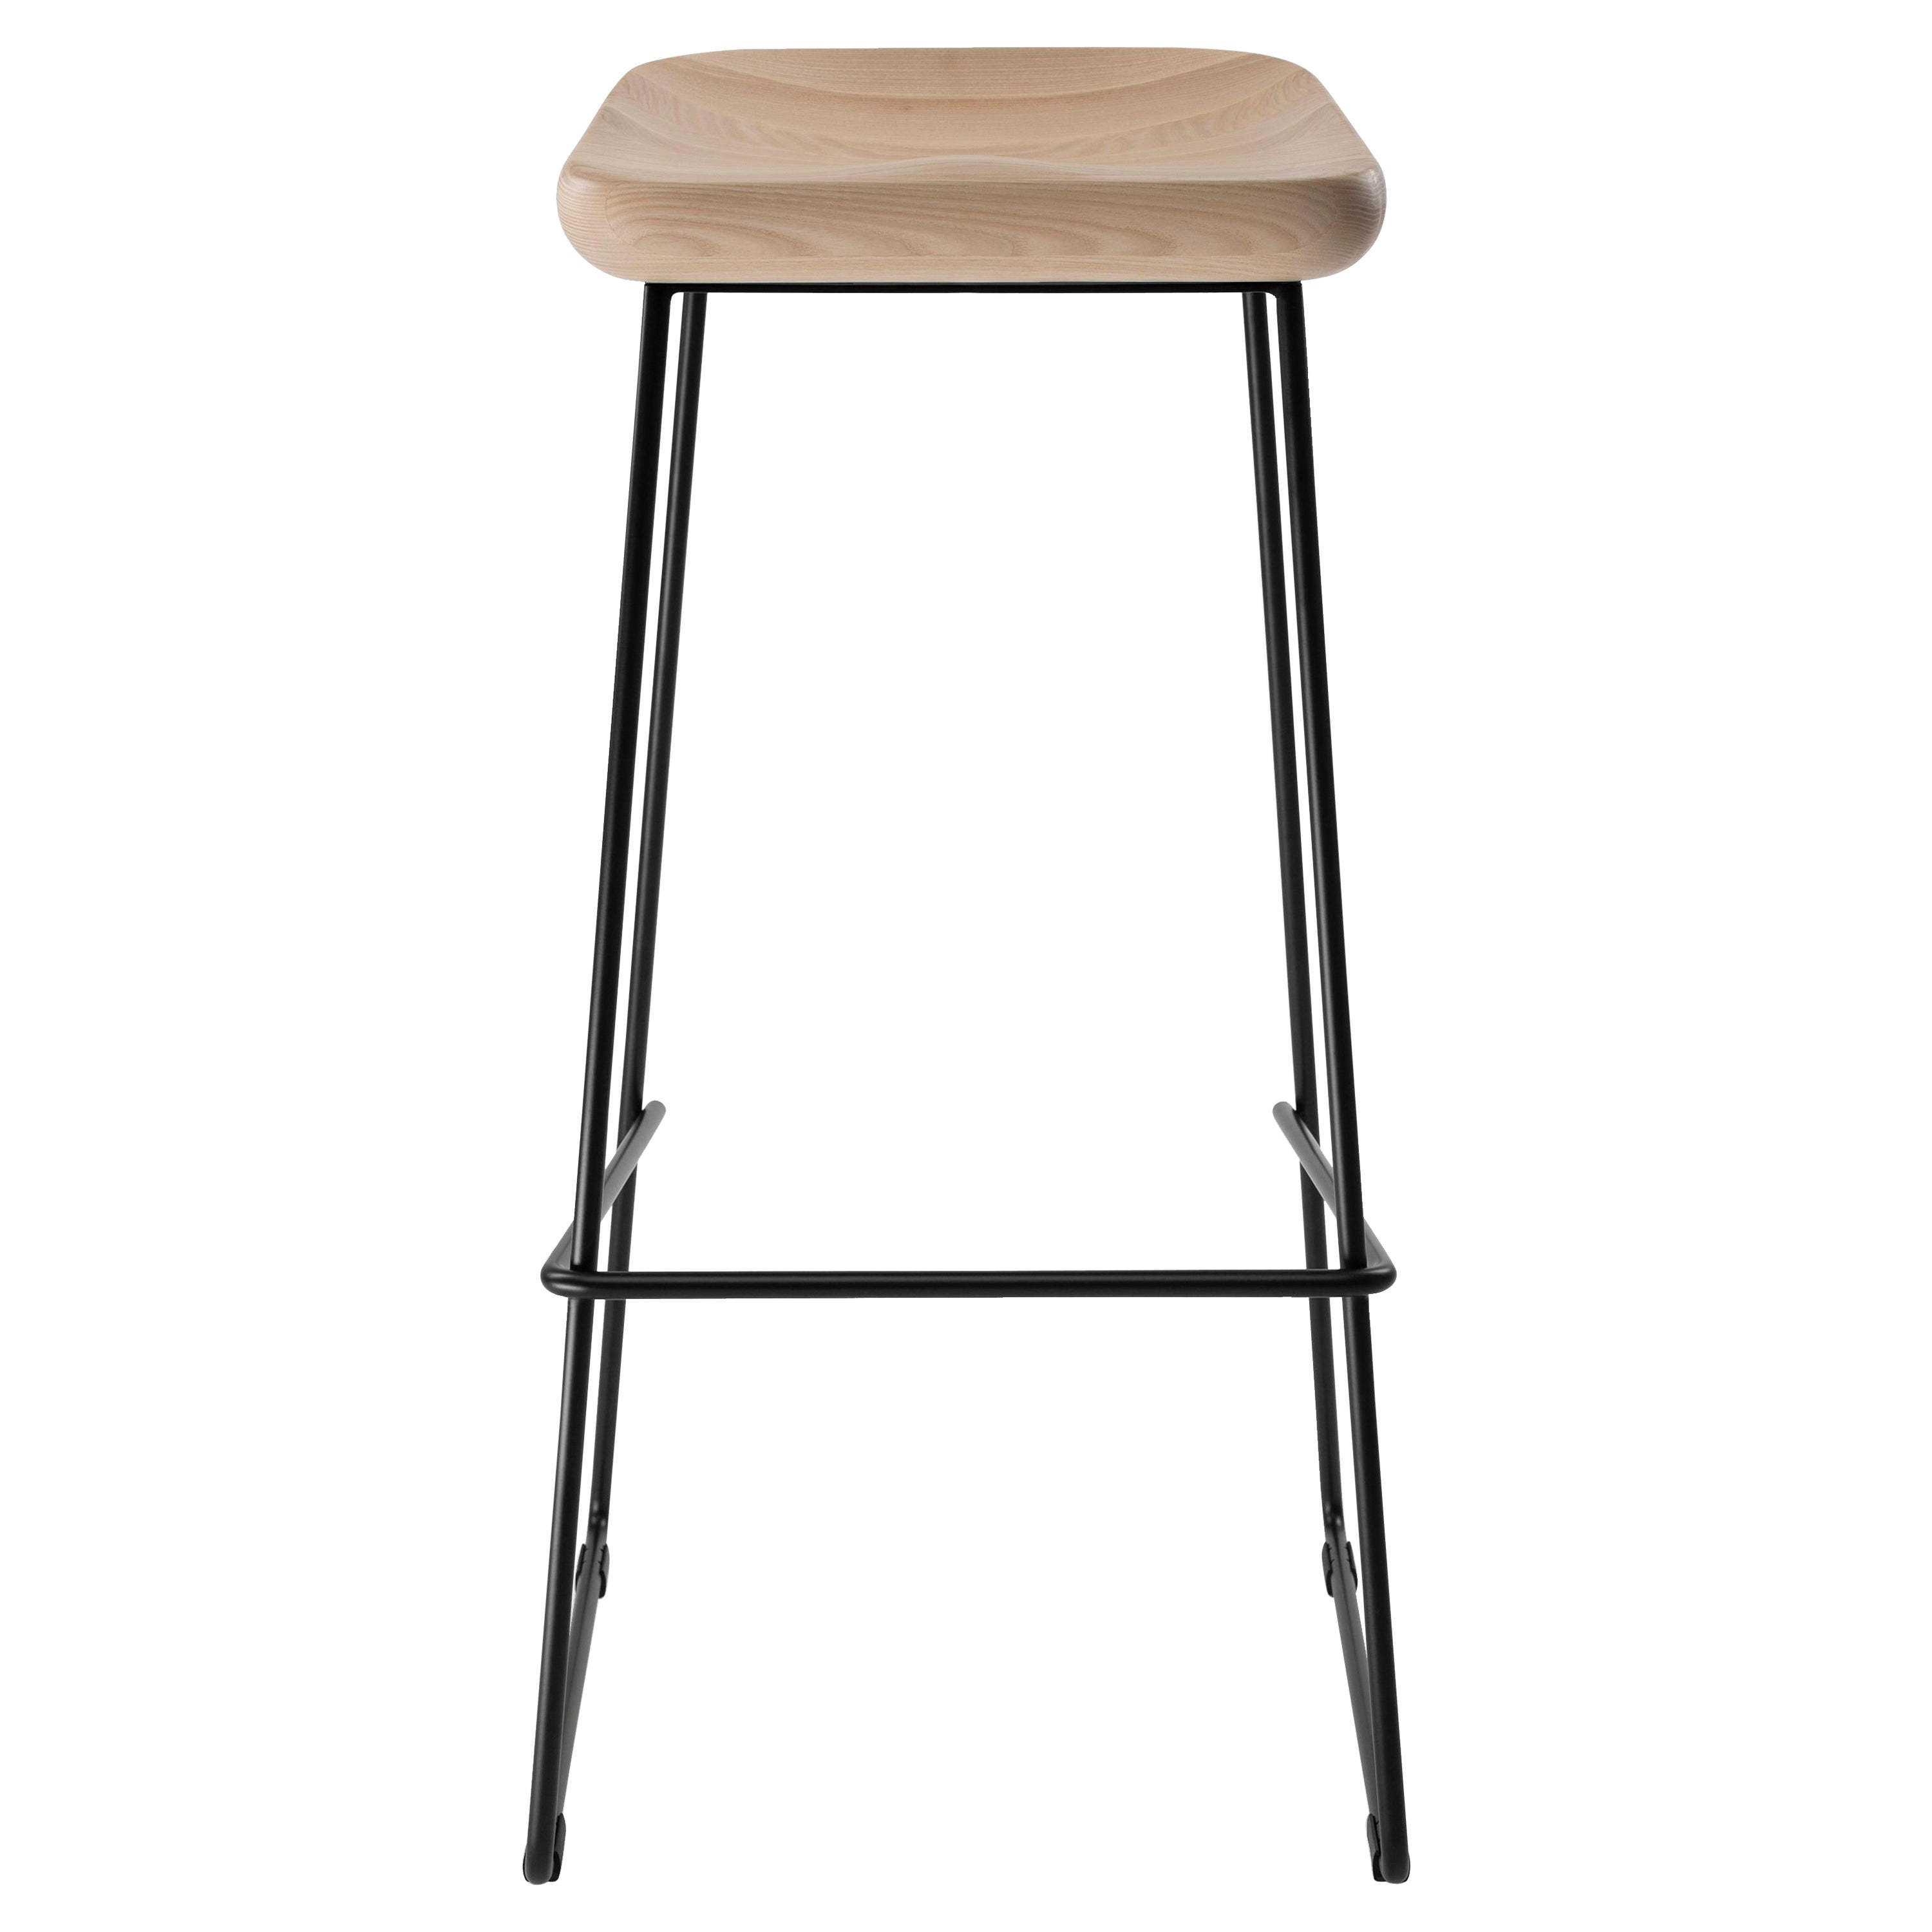 Stylish and Comfortable Bar Stool Wave with Ash Solid Wood Seat and Steel Frame. Discover the perfect seating solution for your bar or kitchen counter with the bar Stool Wave with ash Solid Wood. Made with a comfortable bar stool wave with ash solid